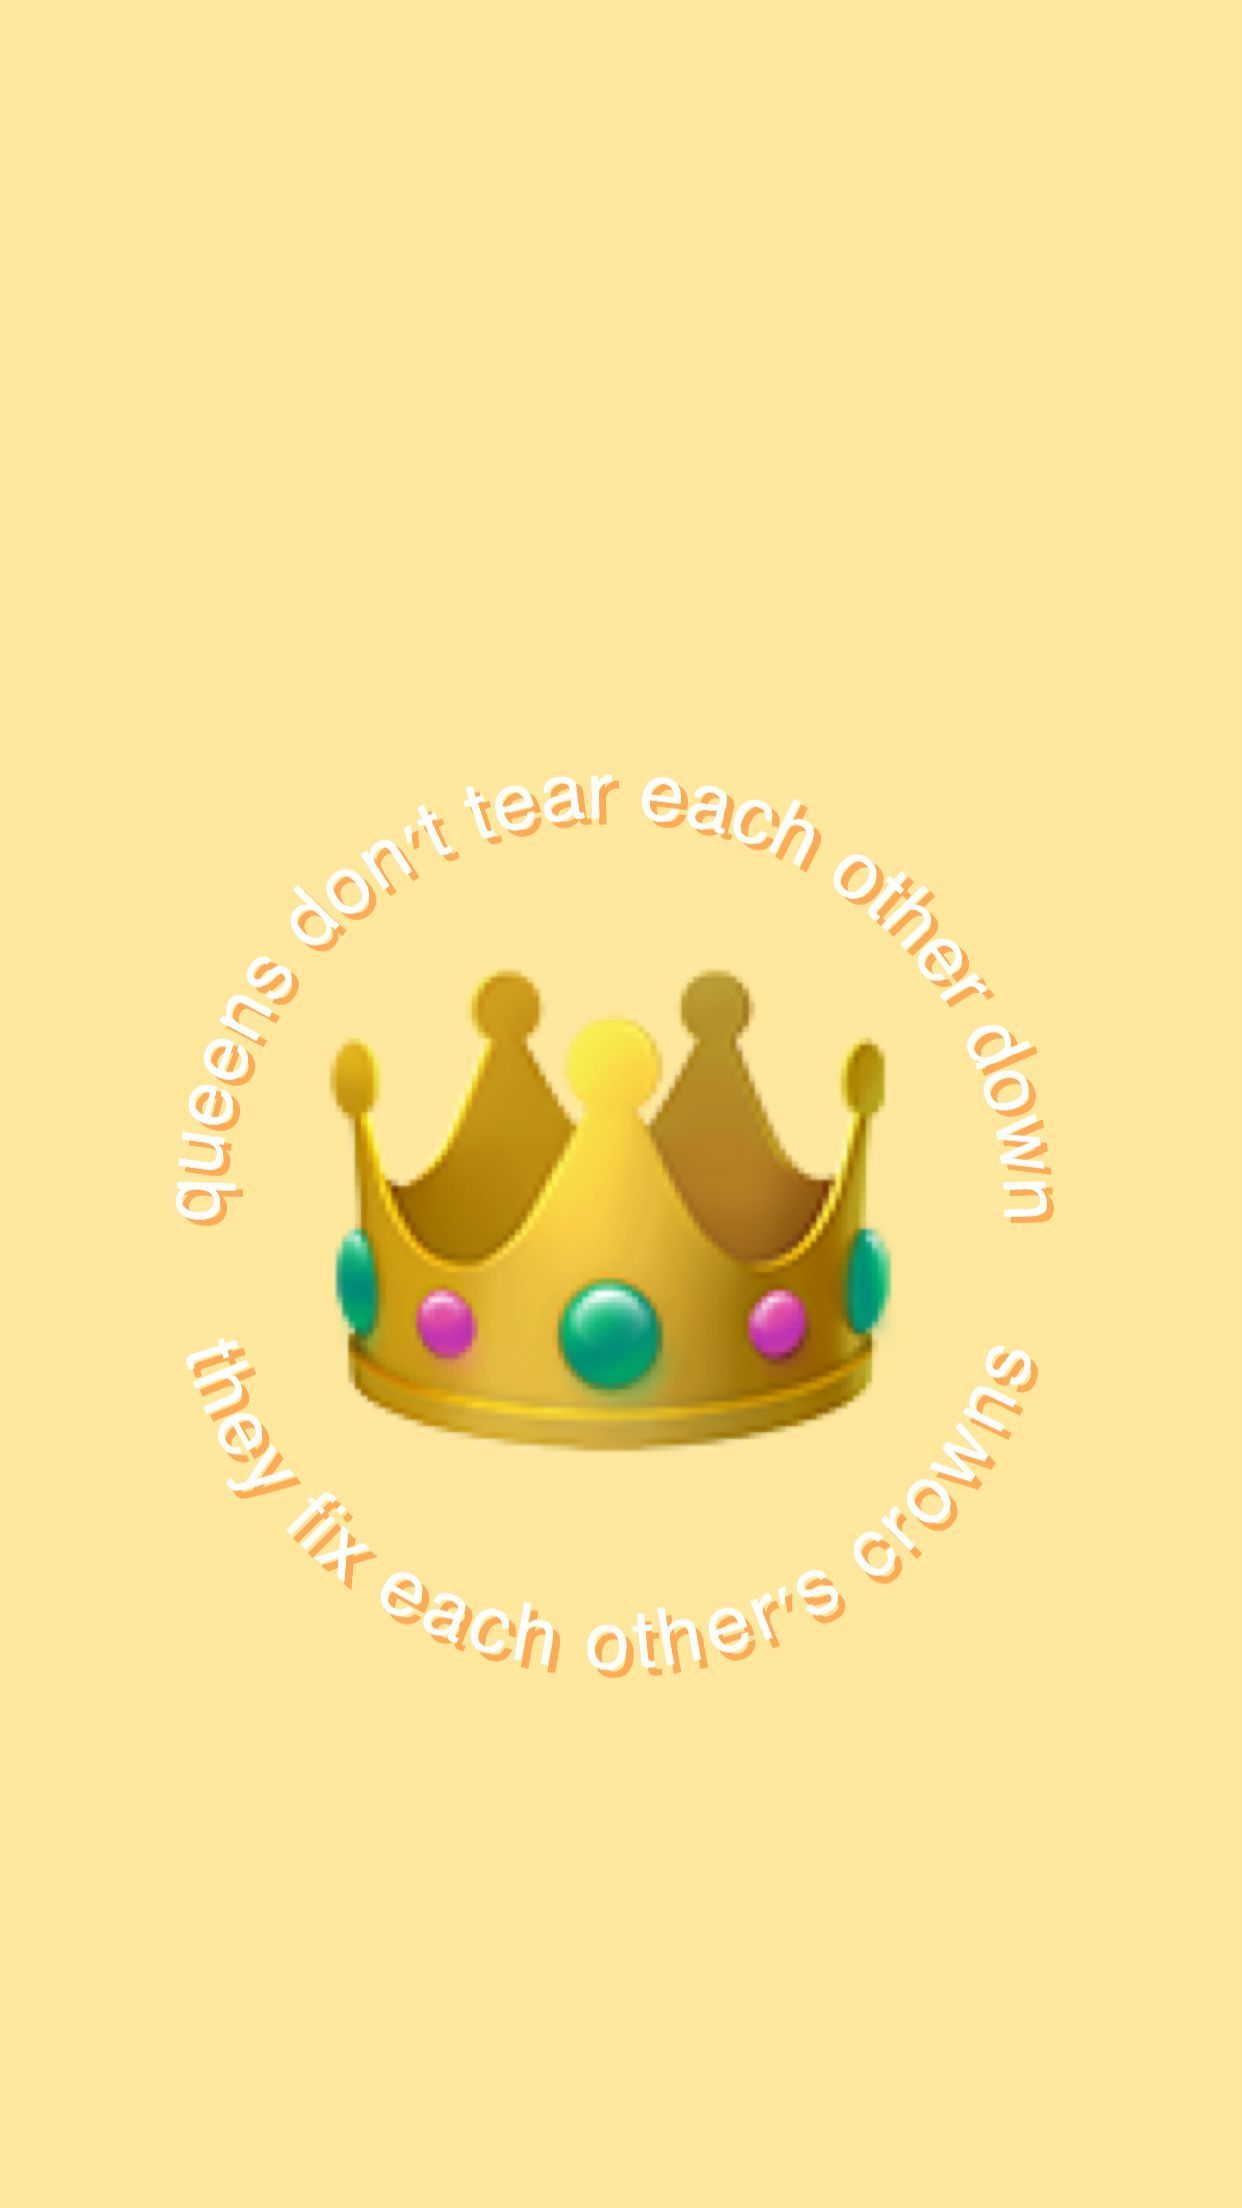 Wallpaper background Aesthetic iPhone crown queen arthoe. Cute emoji wallpaper, Emoji wallpaper, Pretty wallpaper iphone